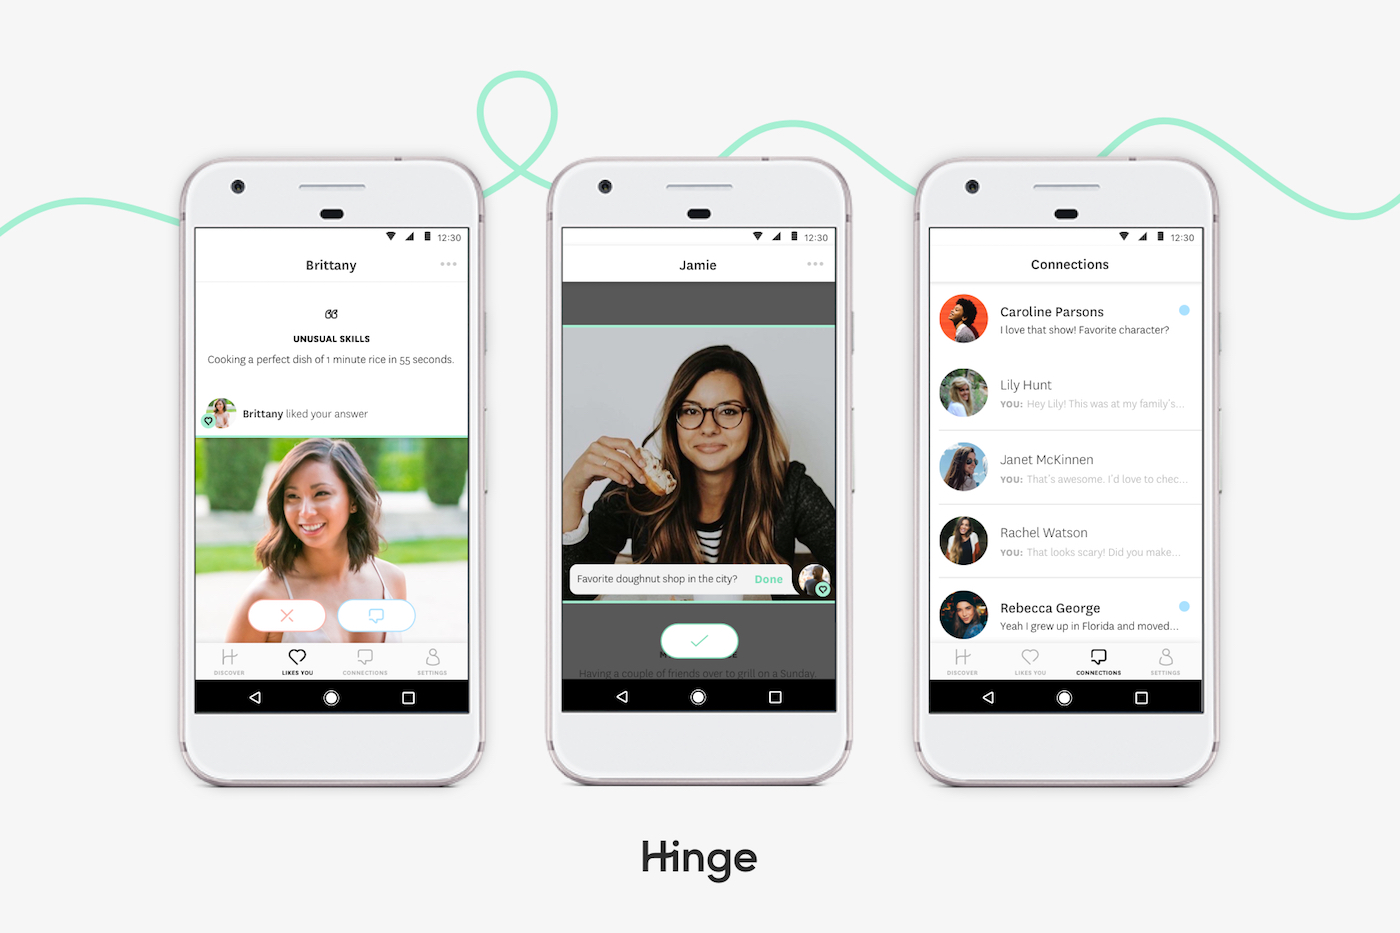 dating app hinge is back on android after nine-month break | engadget